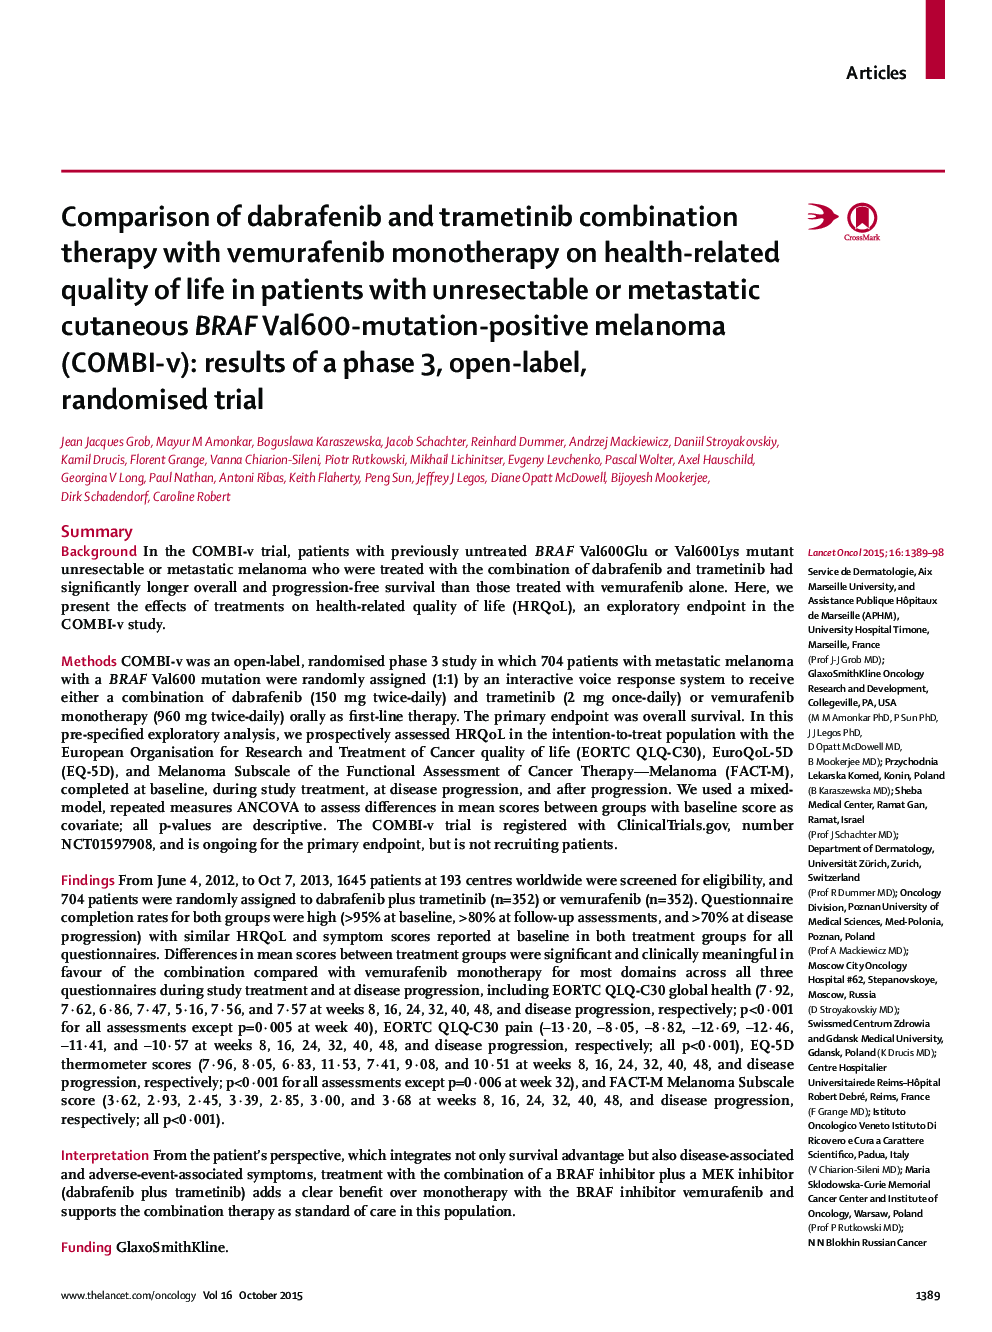 Comparison of dabrafenib and trametinib combination therapy with vemurafenib monotherapy on health-related quality of life in patients with unresectable or metastatic cutaneous BRAF Val600-mutation-positive melanoma (COMBI-v): results of a phase 3, open-l